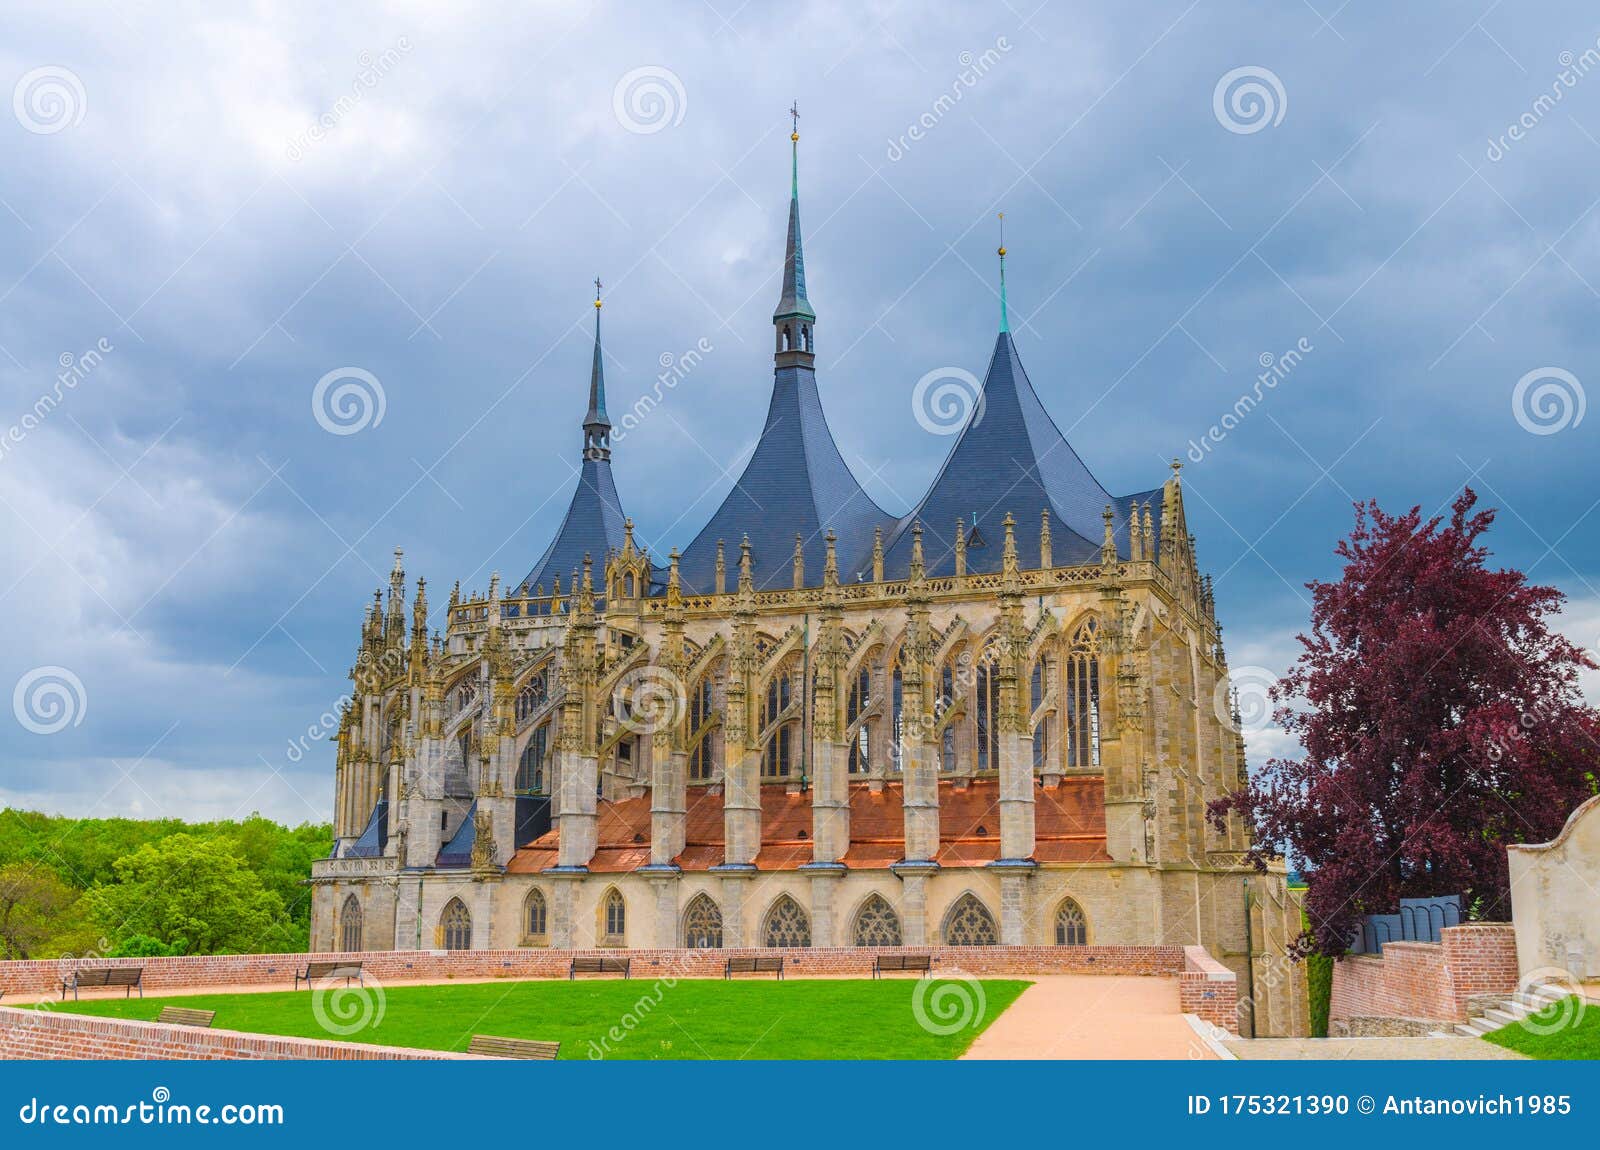 saint barbara`s church cathedral of st barbara roman catholic church gothic style building in kutna hora historical town centre